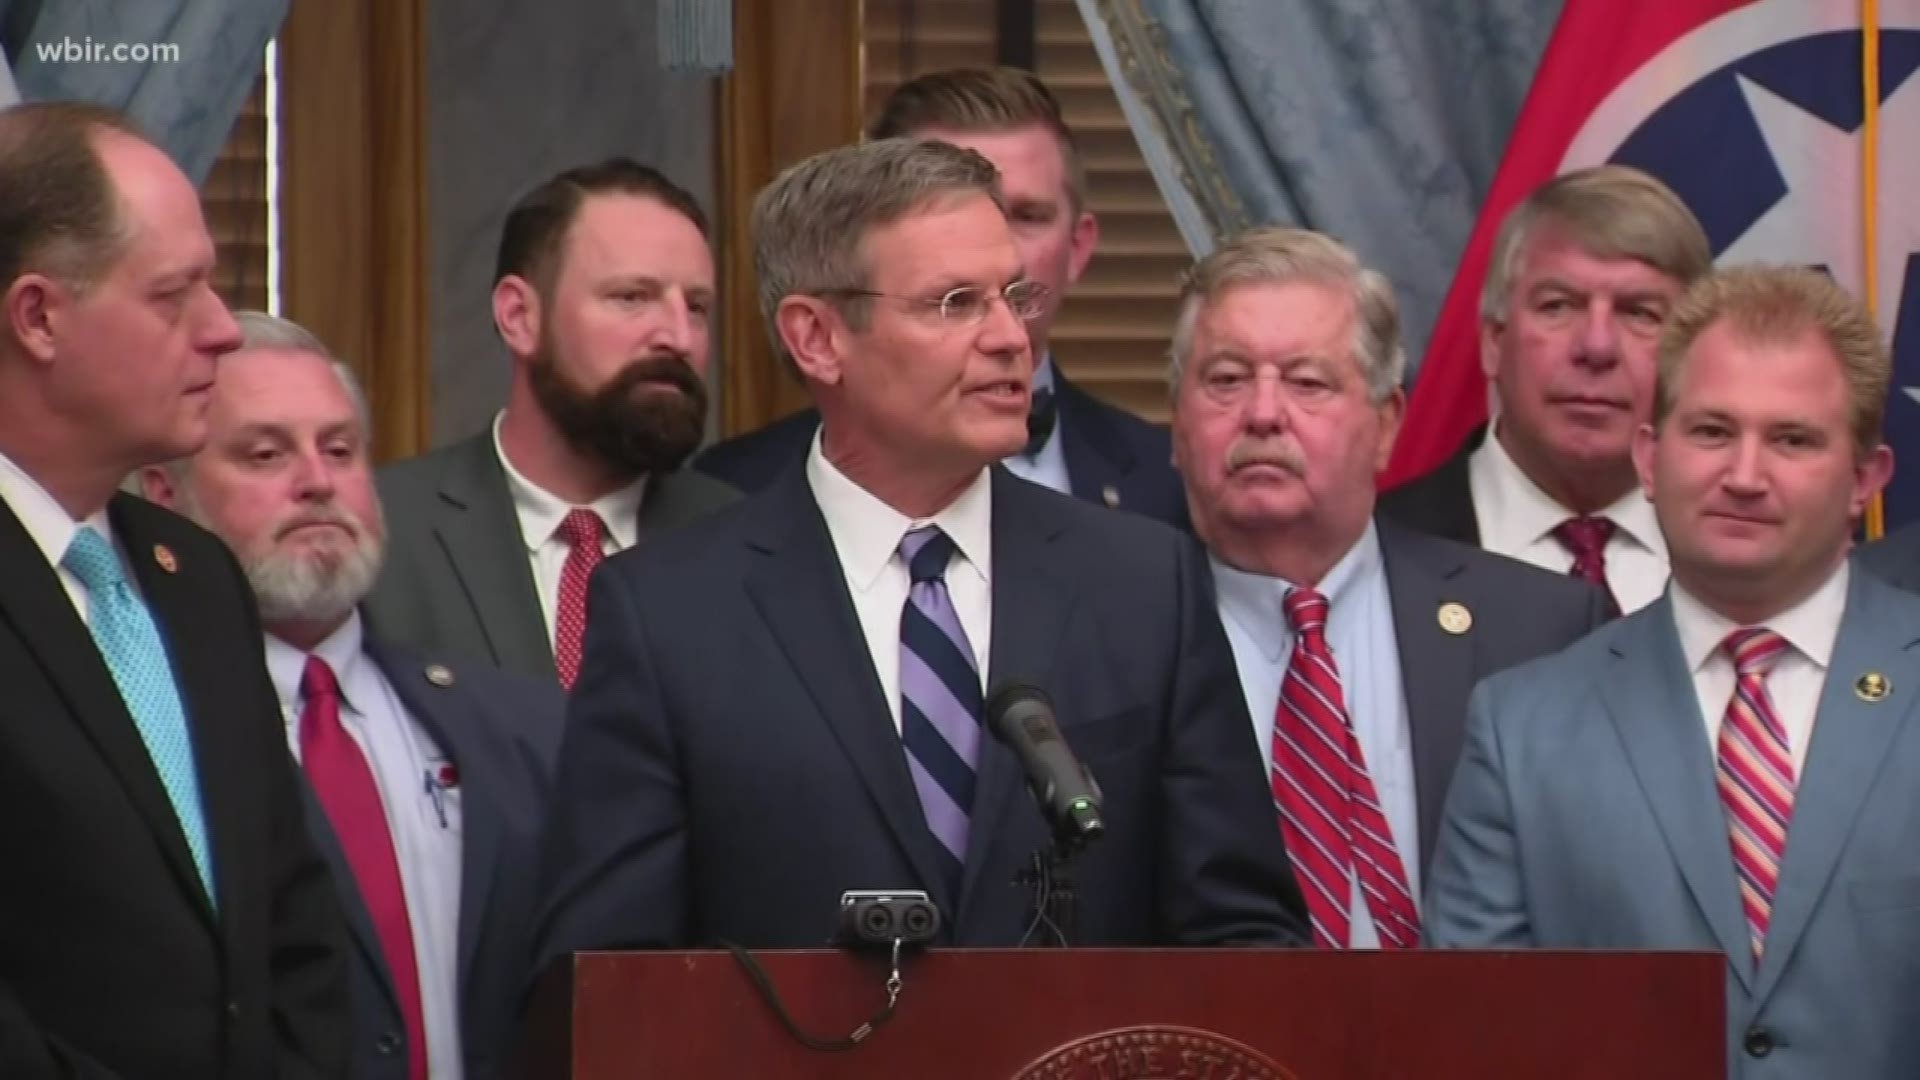 Governor Bill Lee says he wants to make Tennessee one of the most pro-life states in the country.